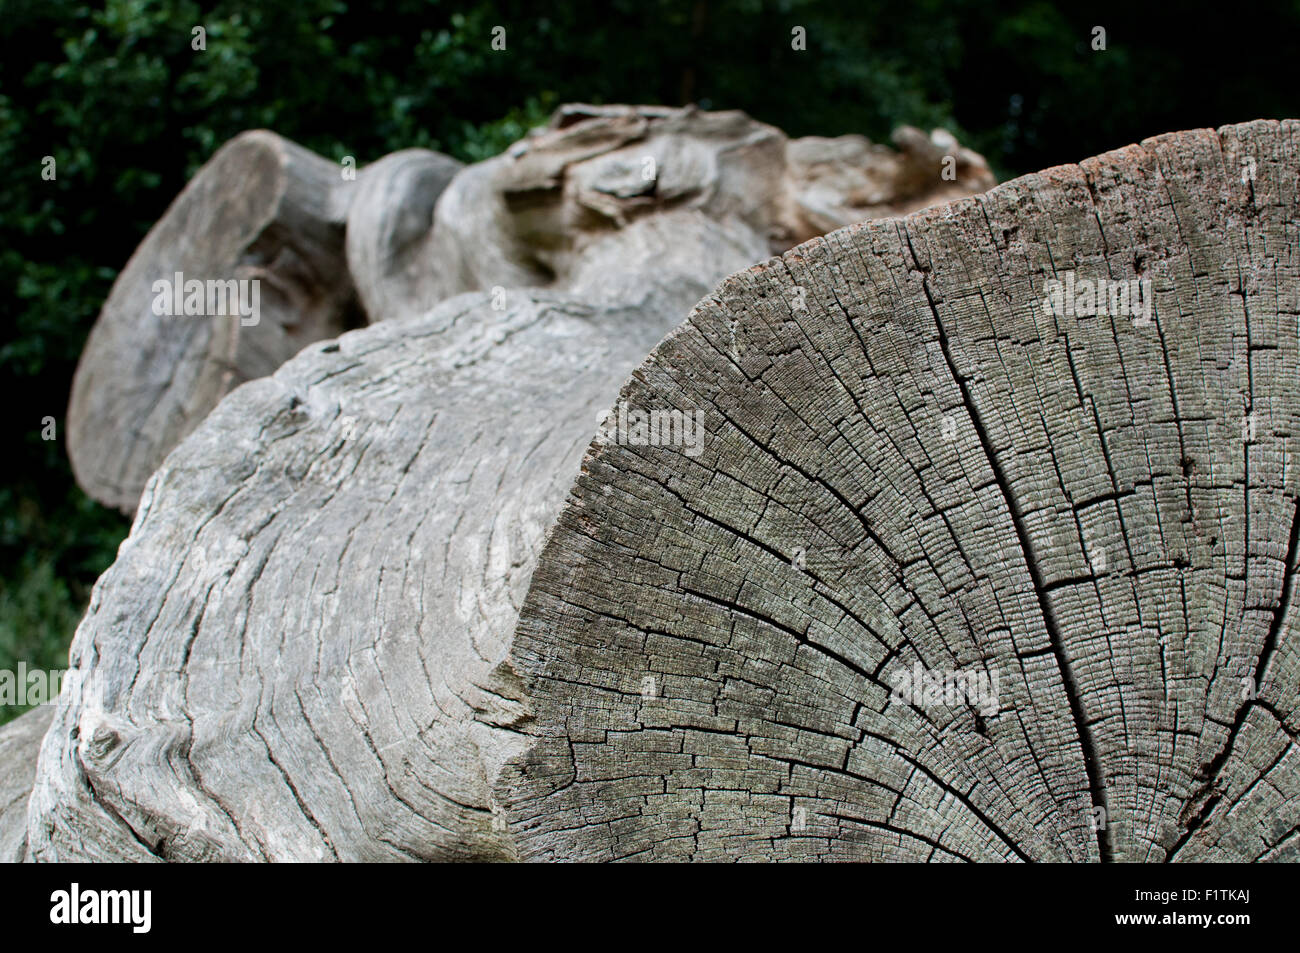 Close up of wood texture on a fallen tree trunk Stock Photo